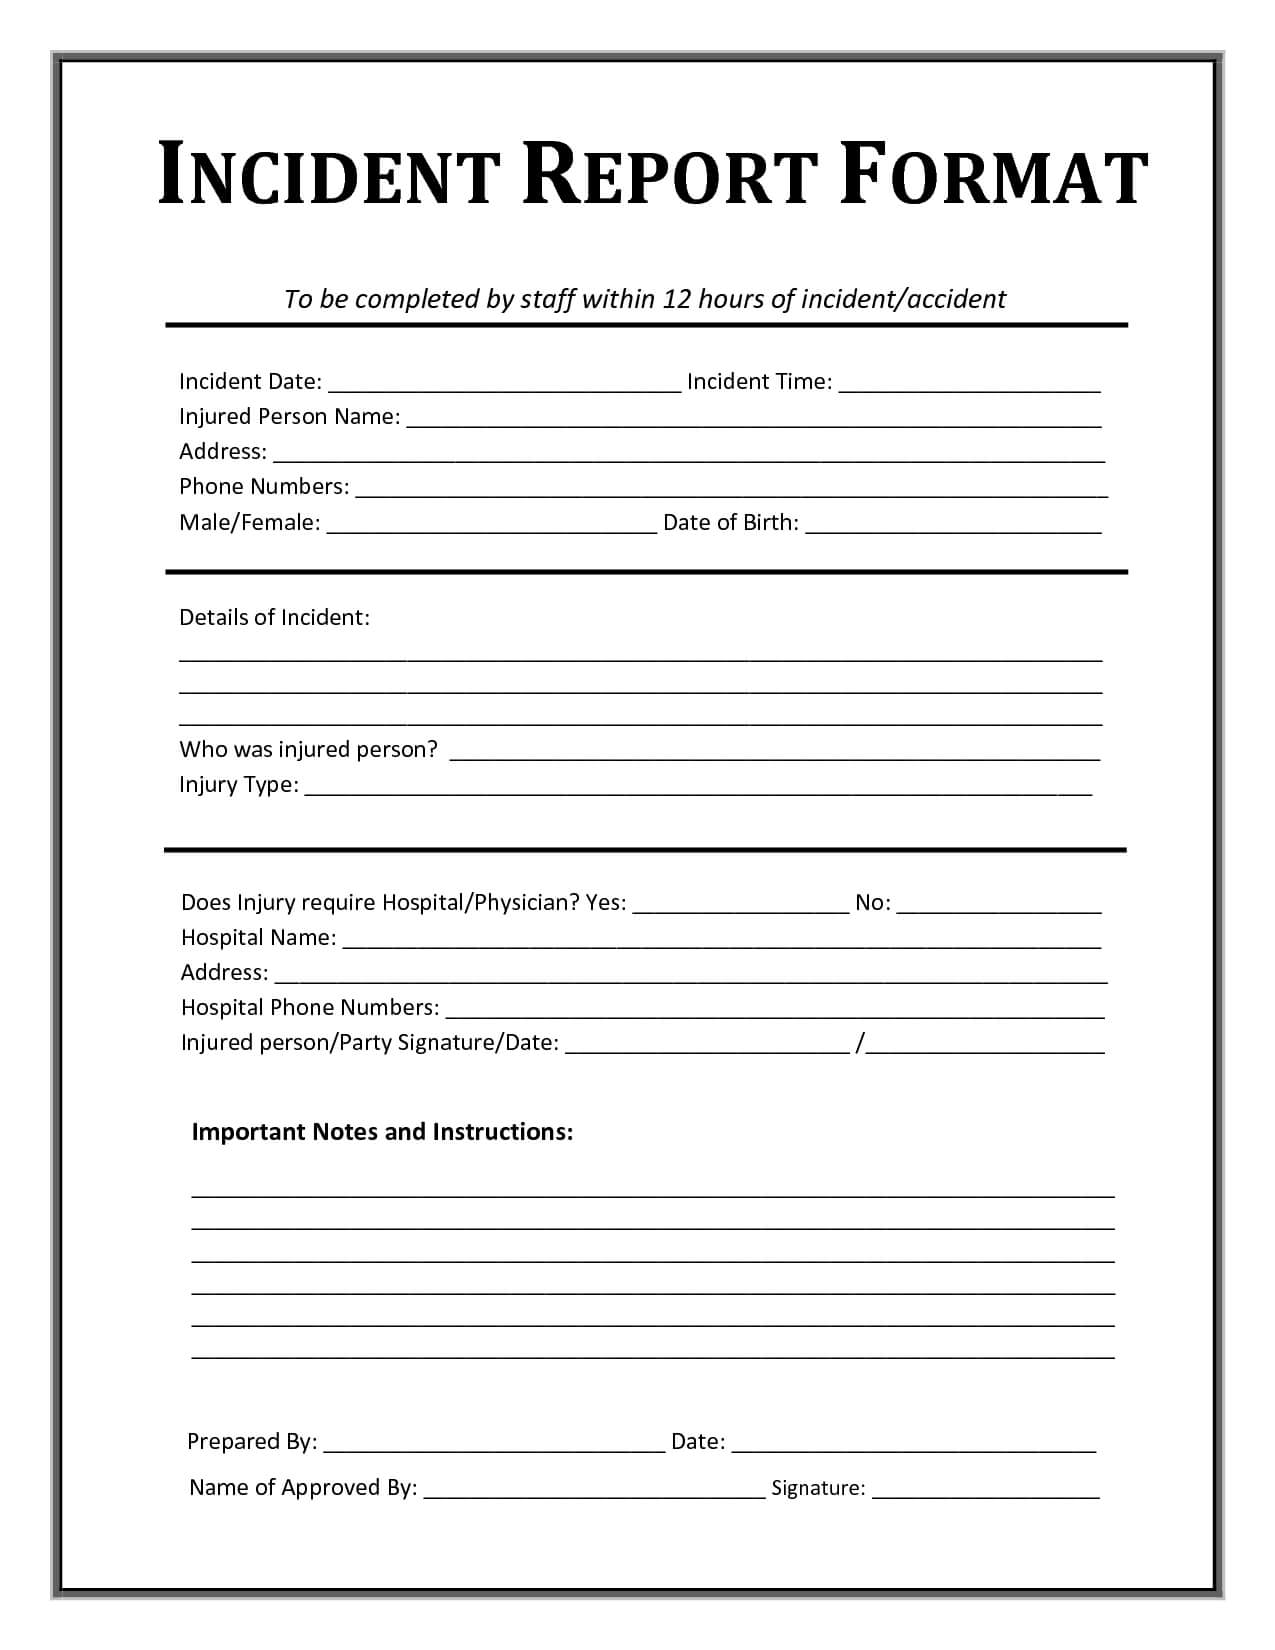 Incident Report Form Template Microsoft Excel | Report Regarding Incident Report Form Template Qld